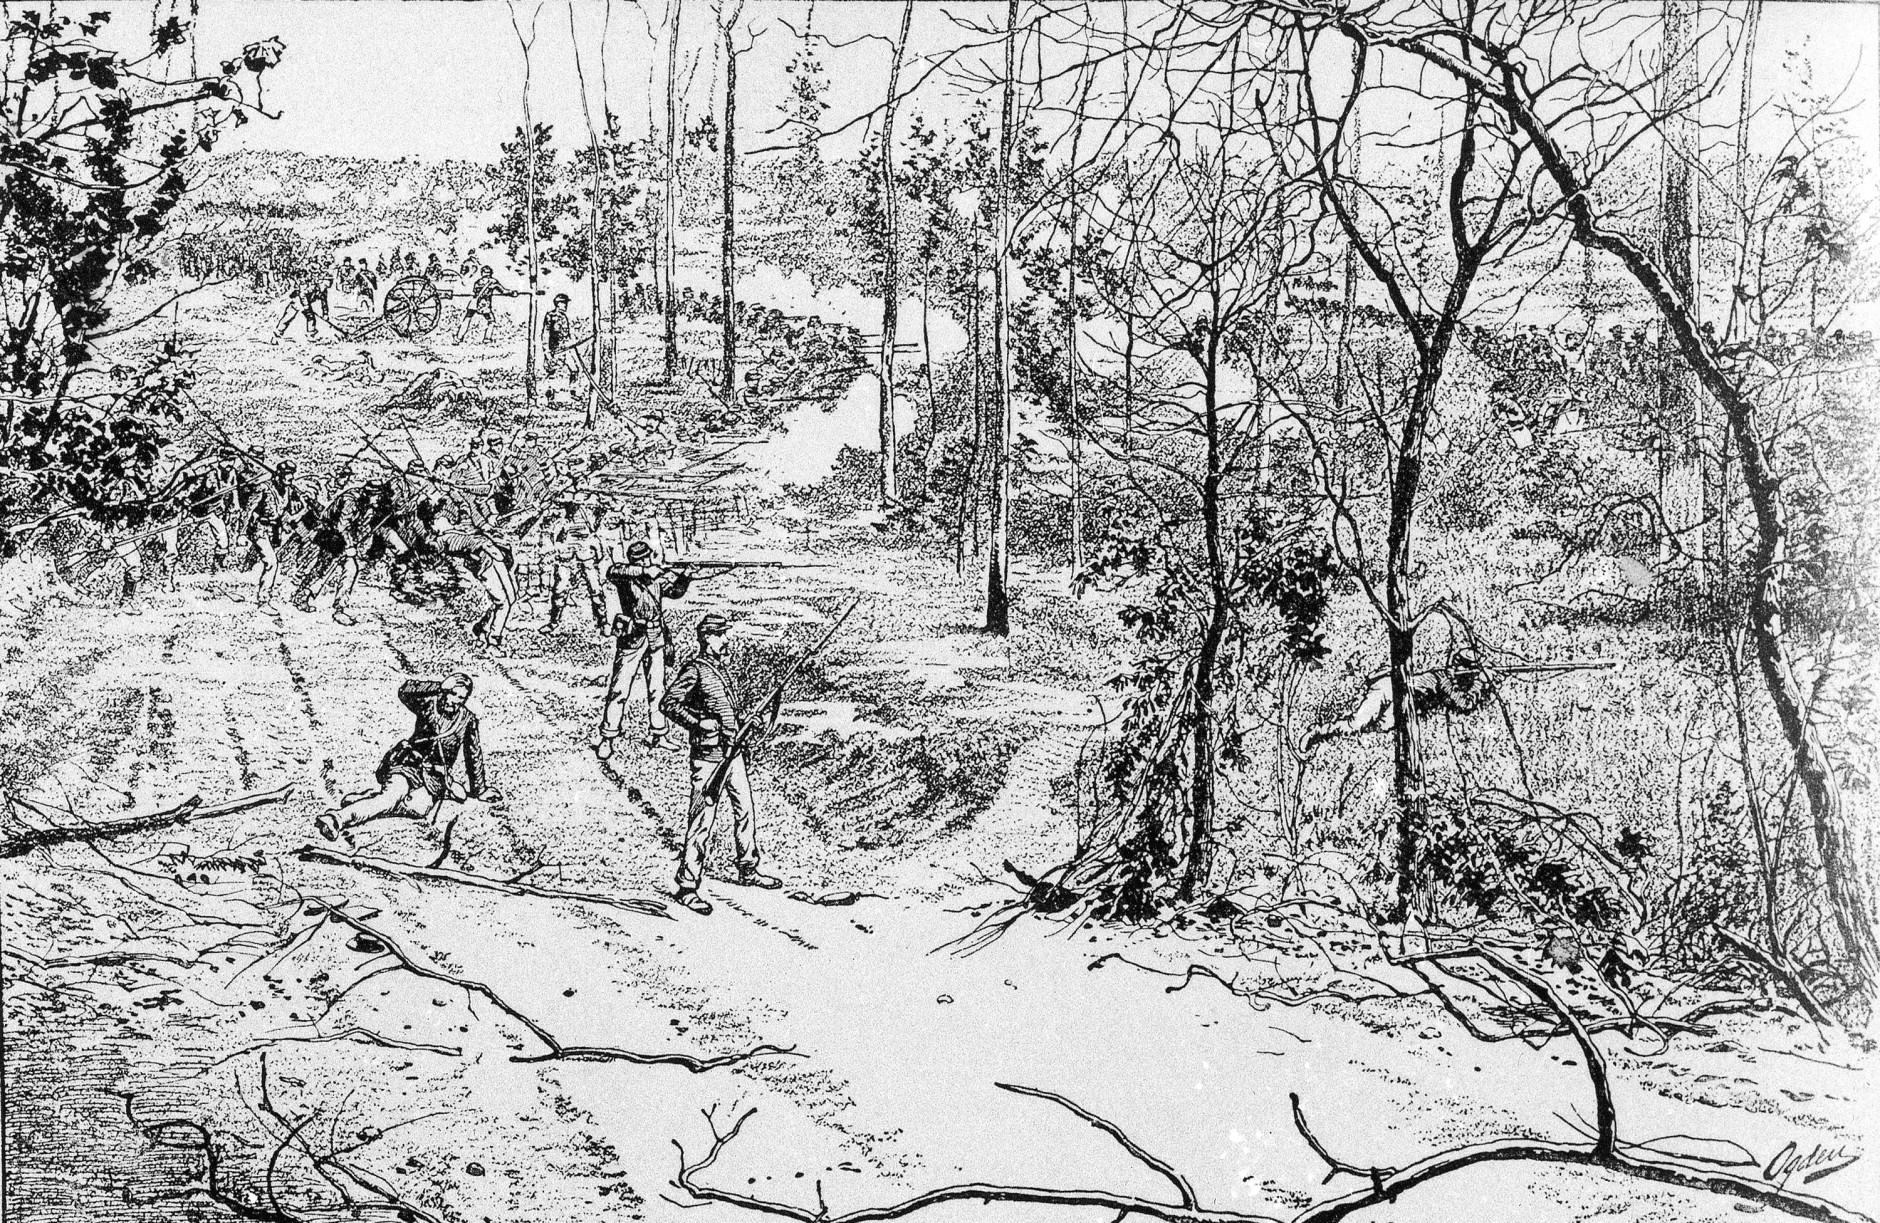 Confederate soldiers attack the Union Army in the Battle of Shiloh, in Tennessee, April 6, 1862, as seen in this rendition by an unknown artist.  (AP Photo)